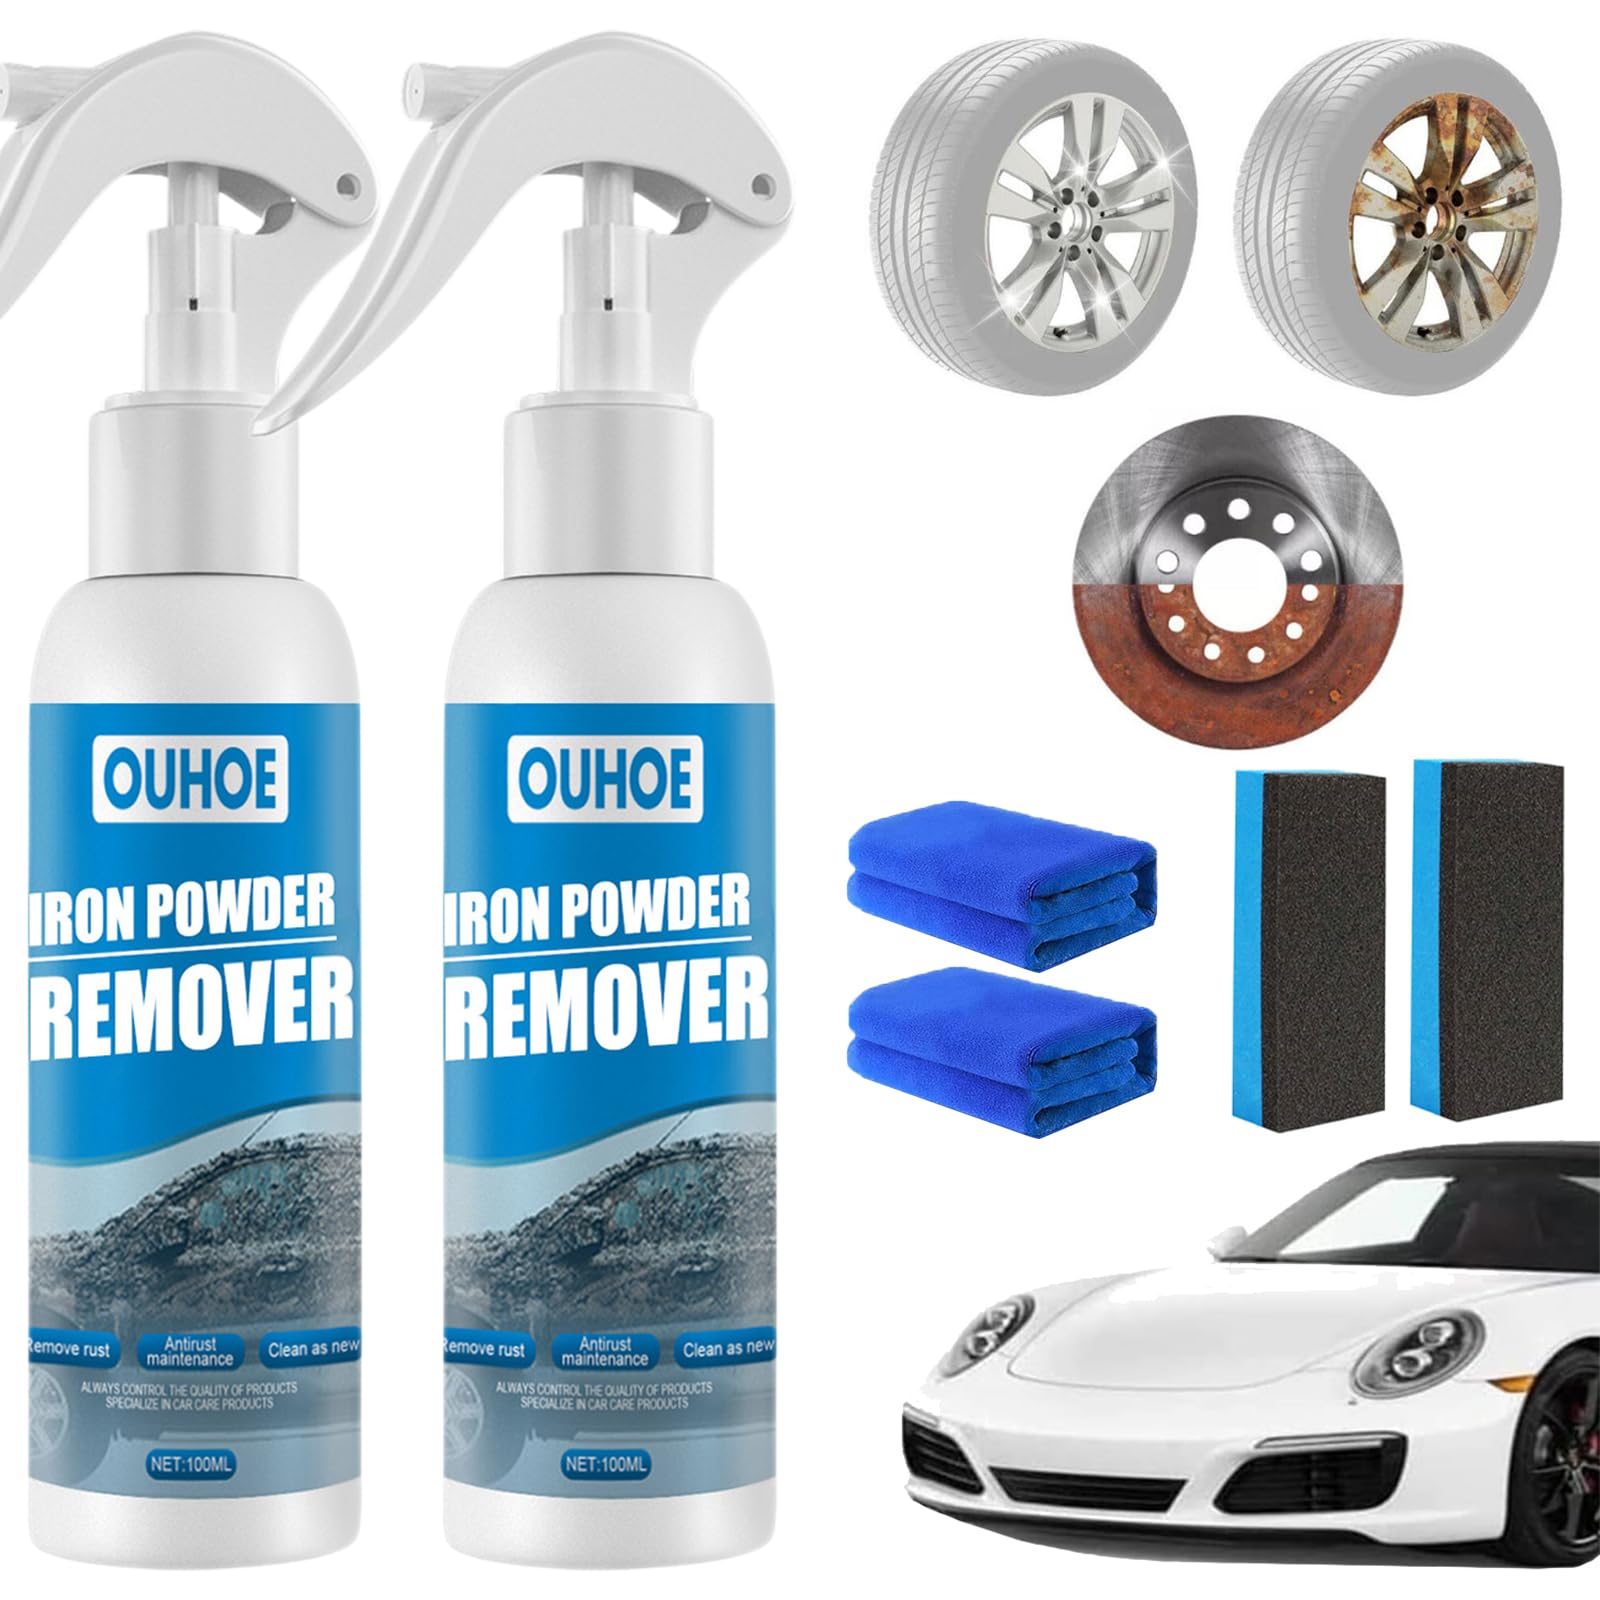 Ouhoe Rust Remover for Metal, Ouhoe Iron Powder Remover, Car Rust Removal Spray for Effective Maintenance, Multifunctional Paint Cleaner, Rust Converter Spray (100ml,2 Pcs) von Qosigote